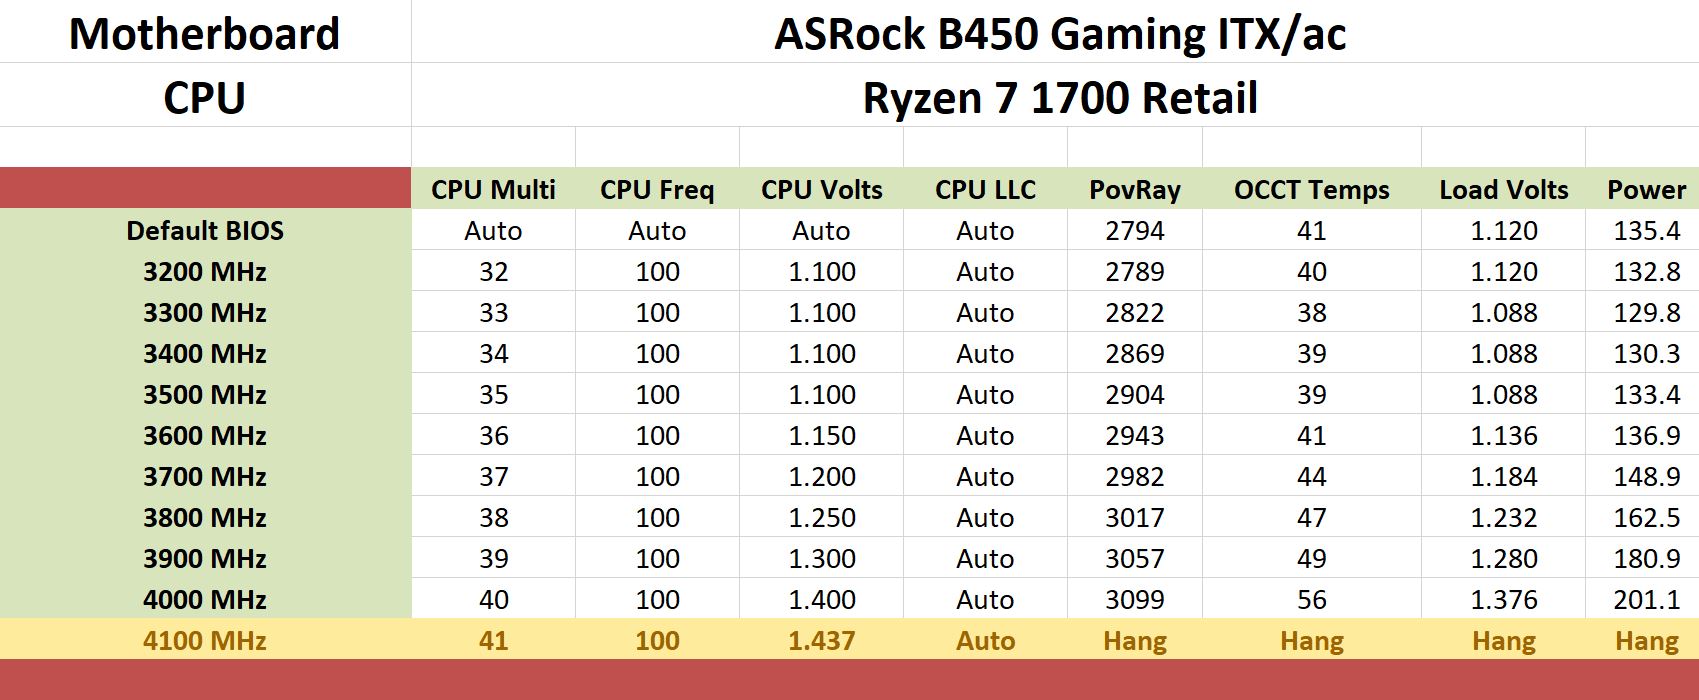 Overclocking With A Ryzen 7 1700 The Asrock B450 Gaming Itx Ac And B450 Gaming K4 Motherboard Reviews